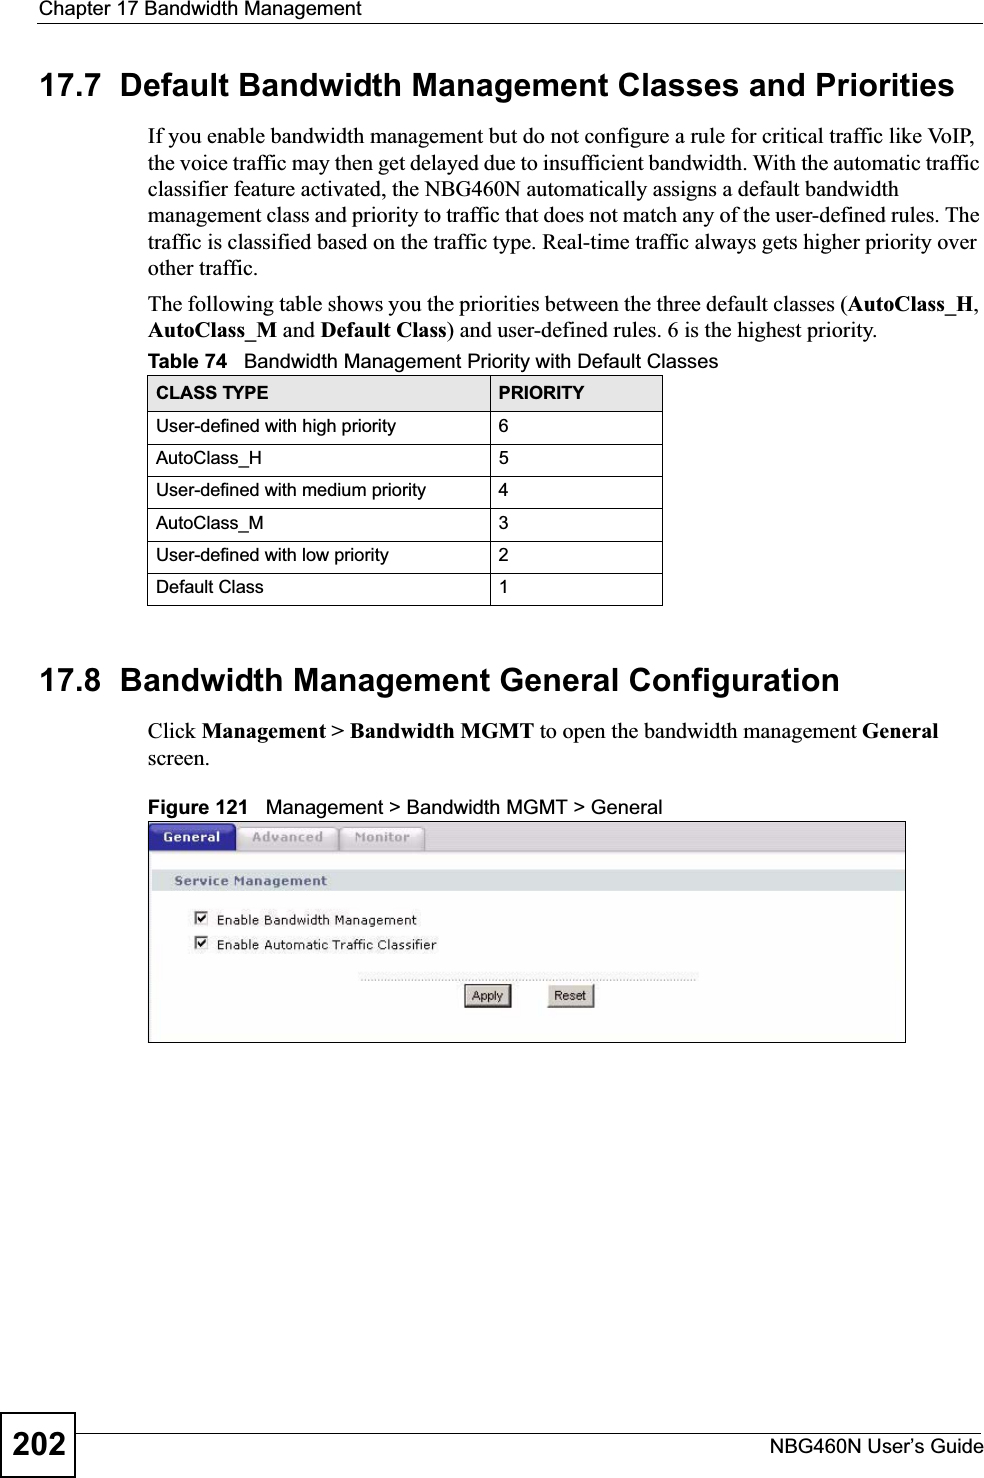 Chapter 17 Bandwidth ManagementNBG460N User’s Guide20217.7  Default Bandwidth Management Classes and PrioritiesIf you enable bandwidth management but do not configure a rule for critical traffic like VoIP, the voice traffic may then get delayed due to insufficient bandwidth. With the automatic traffic classifier feature activated, the NBG460N automatically assigns a default bandwidth management class and priority to traffic that does not match any of the user-defined rules. The traffic is classified based on the traffic type. Real-time traffic always gets higher priority over other traffic. The following table shows you the priorities between the three default classes (AutoClass_H,AutoClass_M and Default Class) and user-defined rules. 6 is the highest priority.17.8  Bandwidth Management General Configuration Click Management &gt; Bandwidth MGMT to open the bandwidth management Generalscreen.Figure 121   Management &gt; Bandwidth MGMT &gt; General   Table 74   Bandwidth Management Priority with Default ClassesCLASS TYPE PRIORITYUser-defined with high priority 6AutoClass_H 5User-defined with medium priority 4AutoClass_M 3User-defined with low priority 2Default Class 1